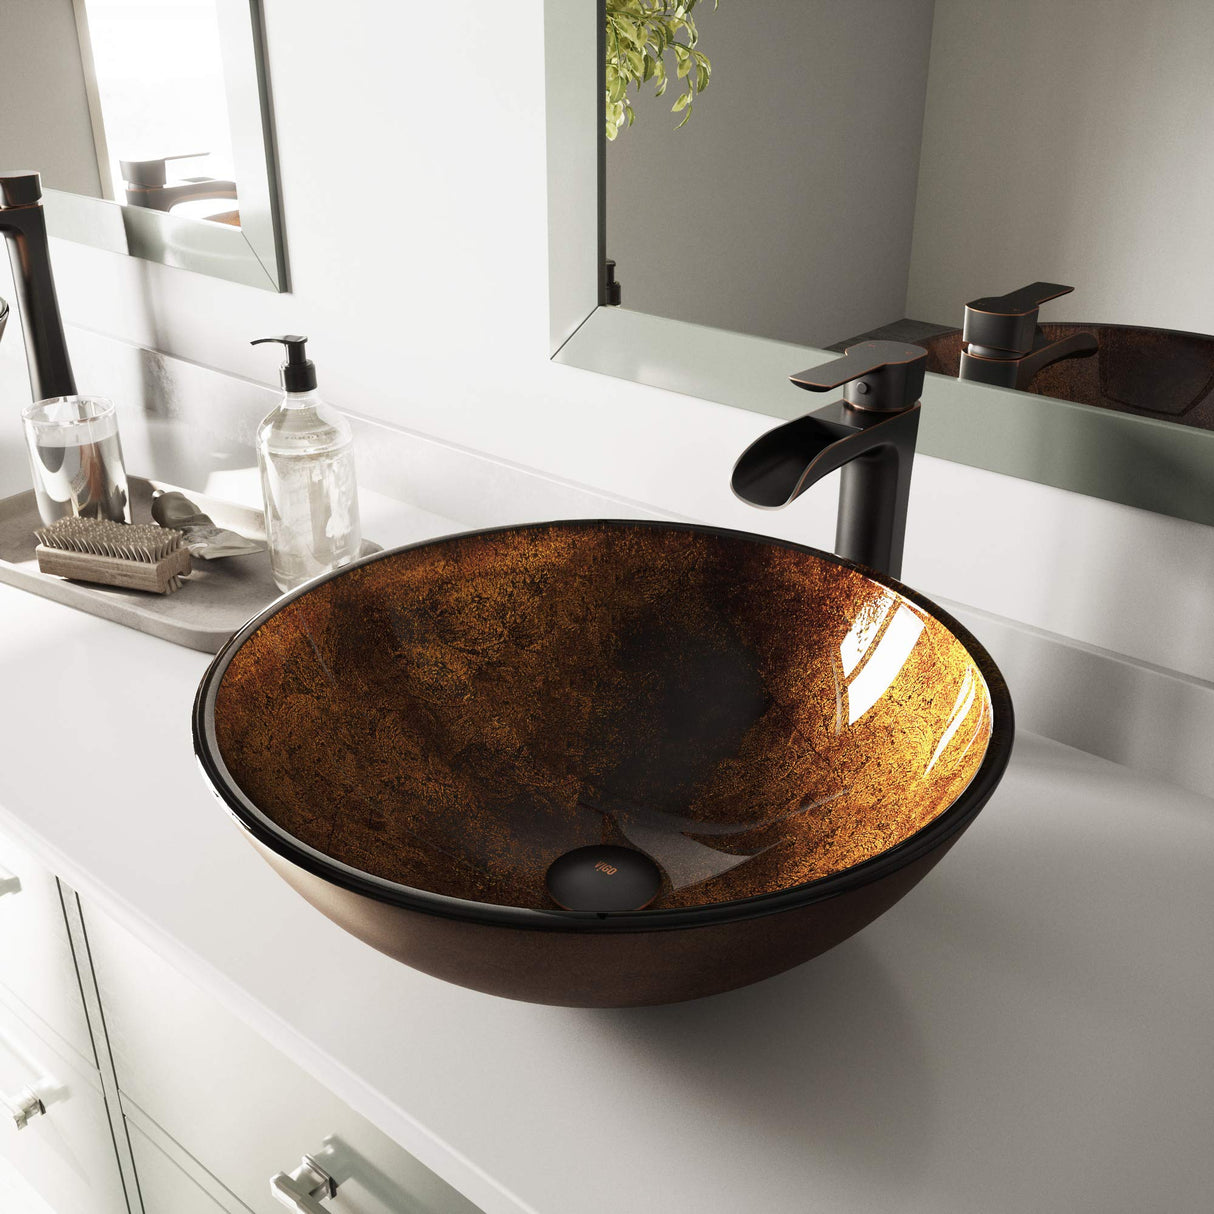 VIGO Russet 16.5 inch Diameter Over the Counter Freestanding Matte Stone Round Vessel Bathroom Sink in Gold and Brown Fusion - Sink for Bathroom VG07505